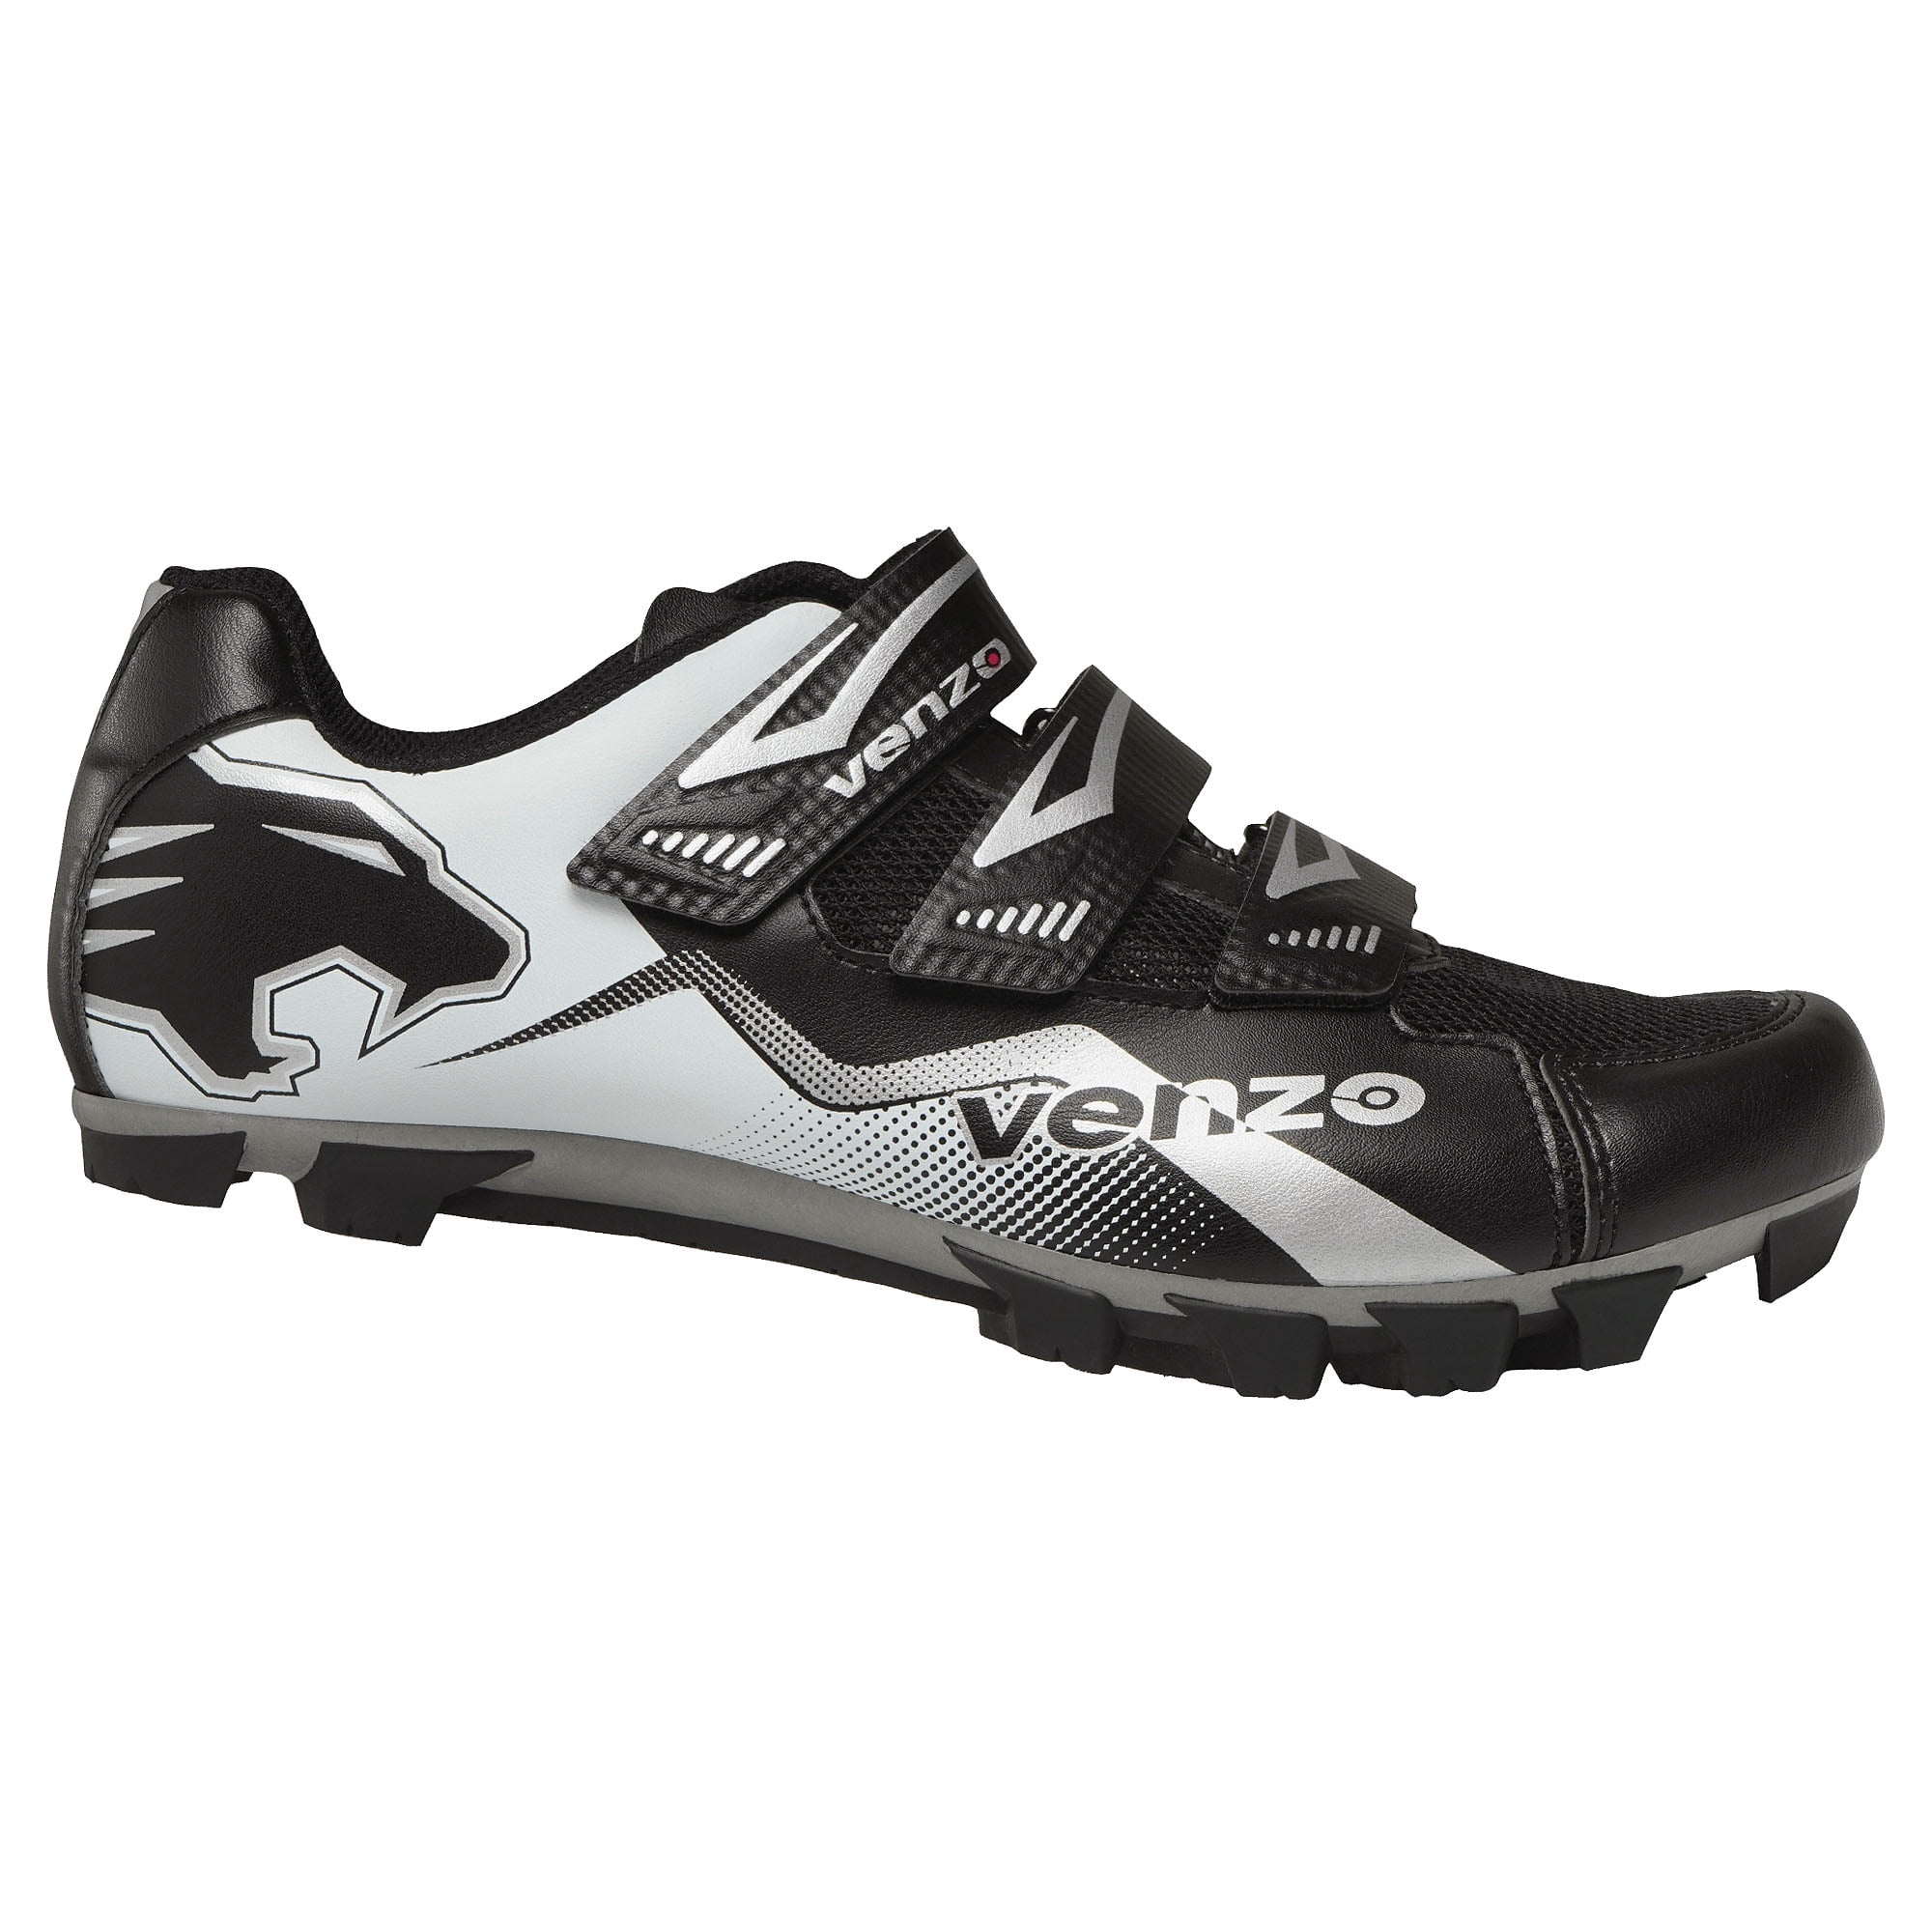 venzo cycling shoes review